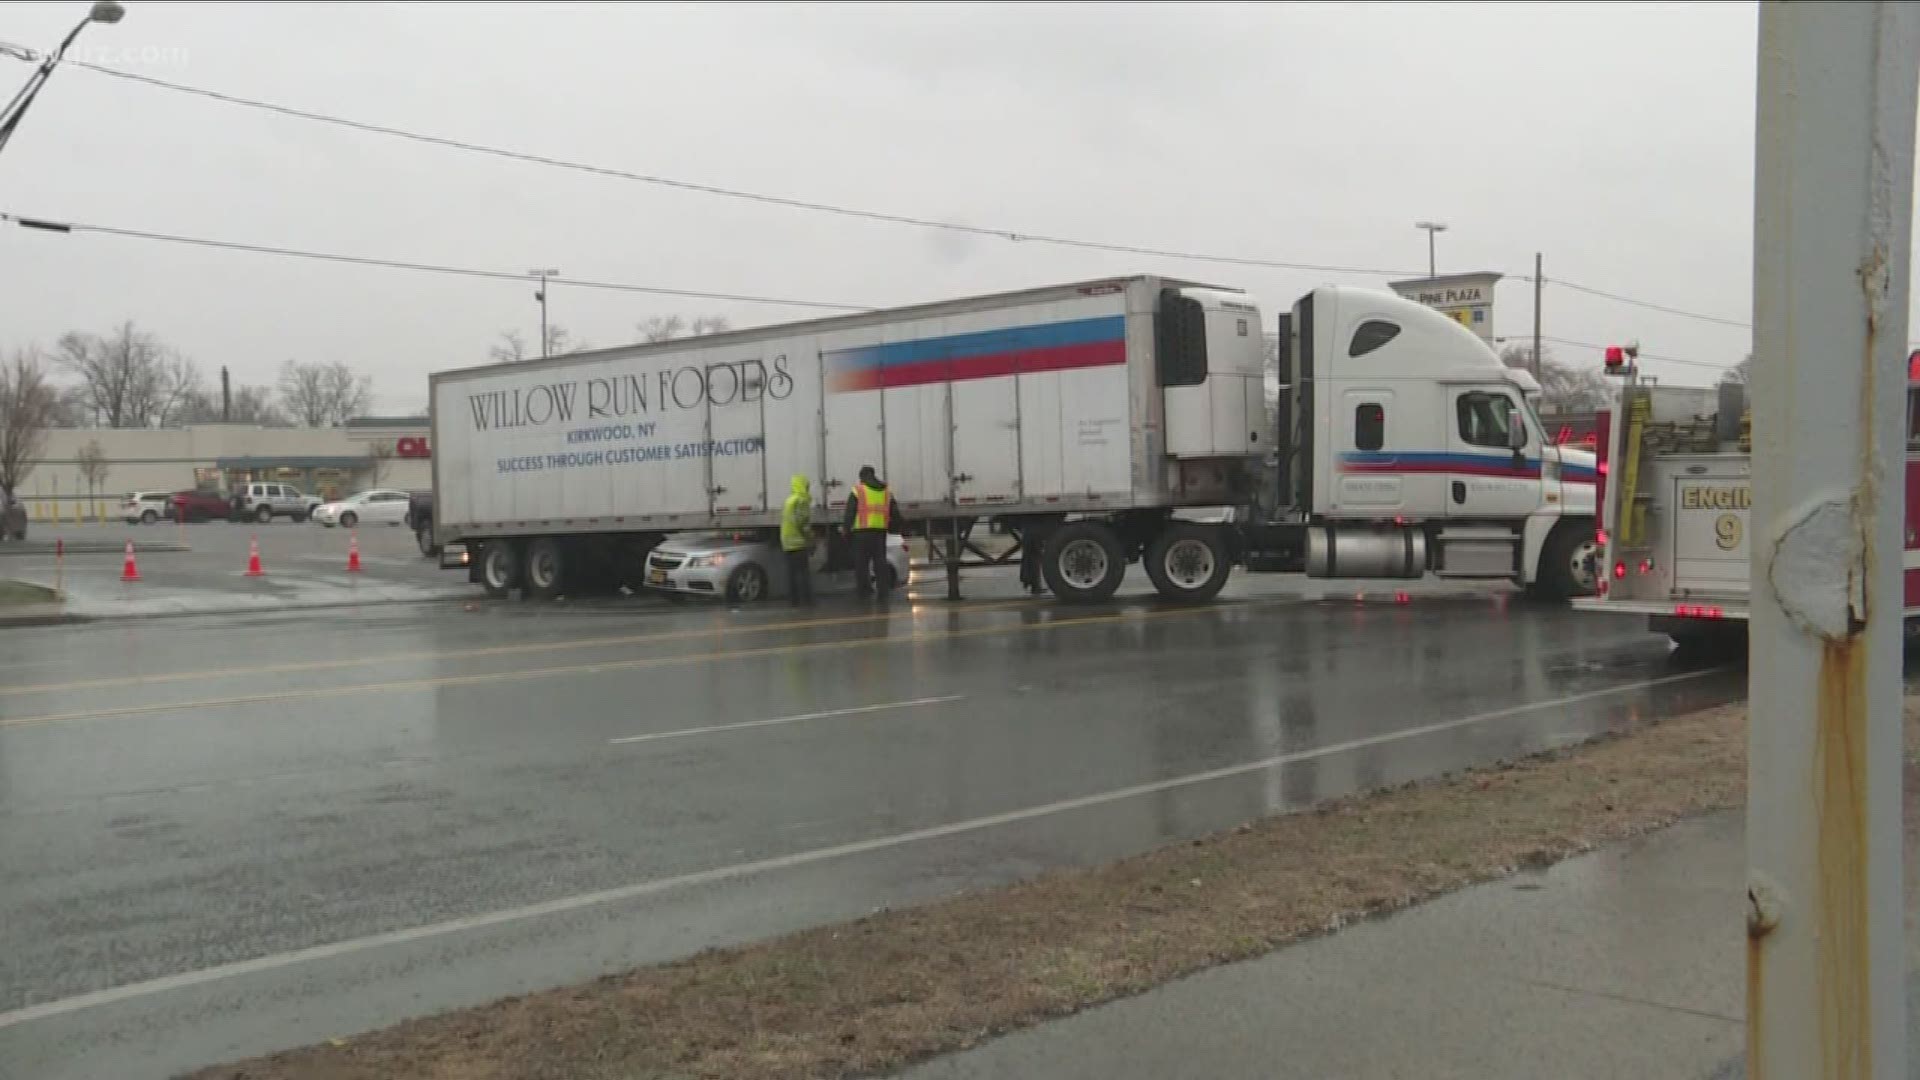 Police say one person was taken to the hospital after a car got pinned under a tractor trailer.
We don't yet know how badly that person was hurt.